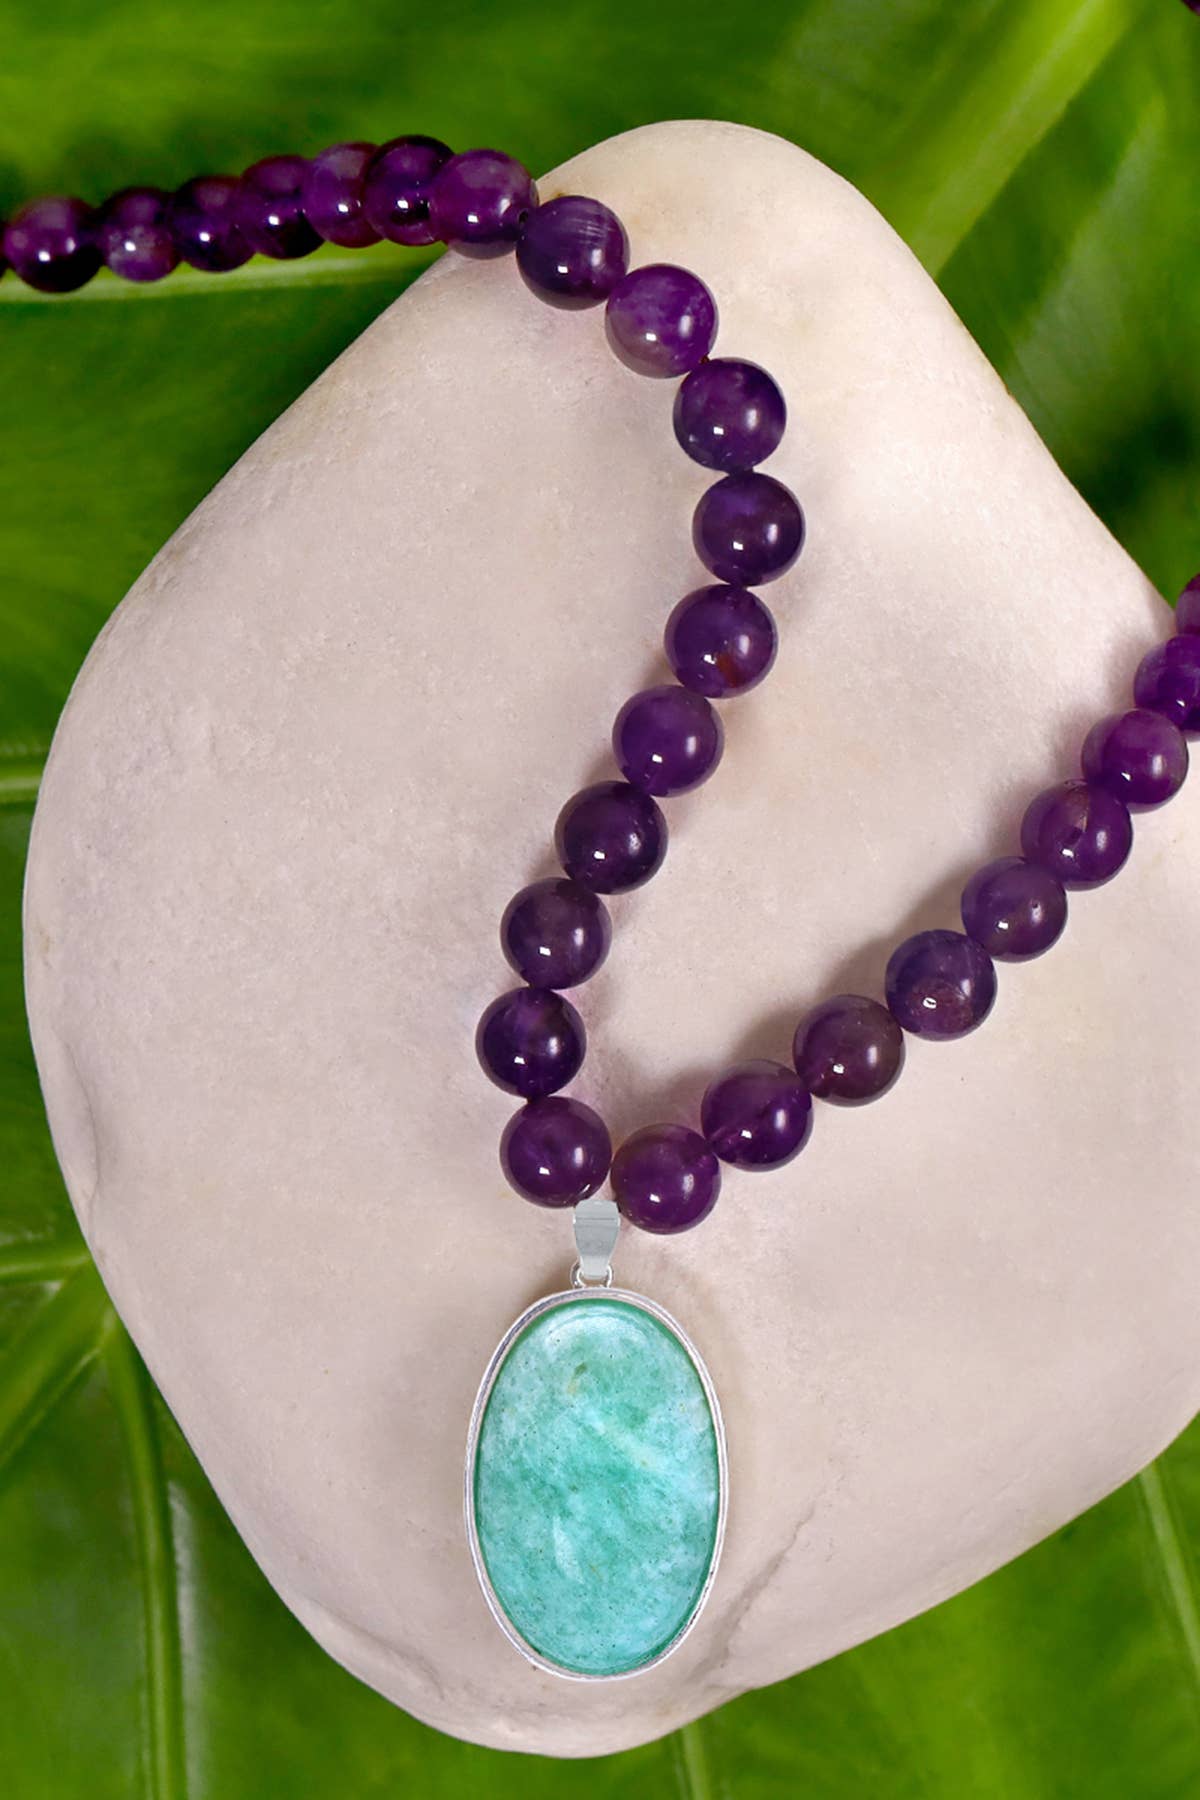 Amethyst Beads Necklace With Amazonite Pendant - SS